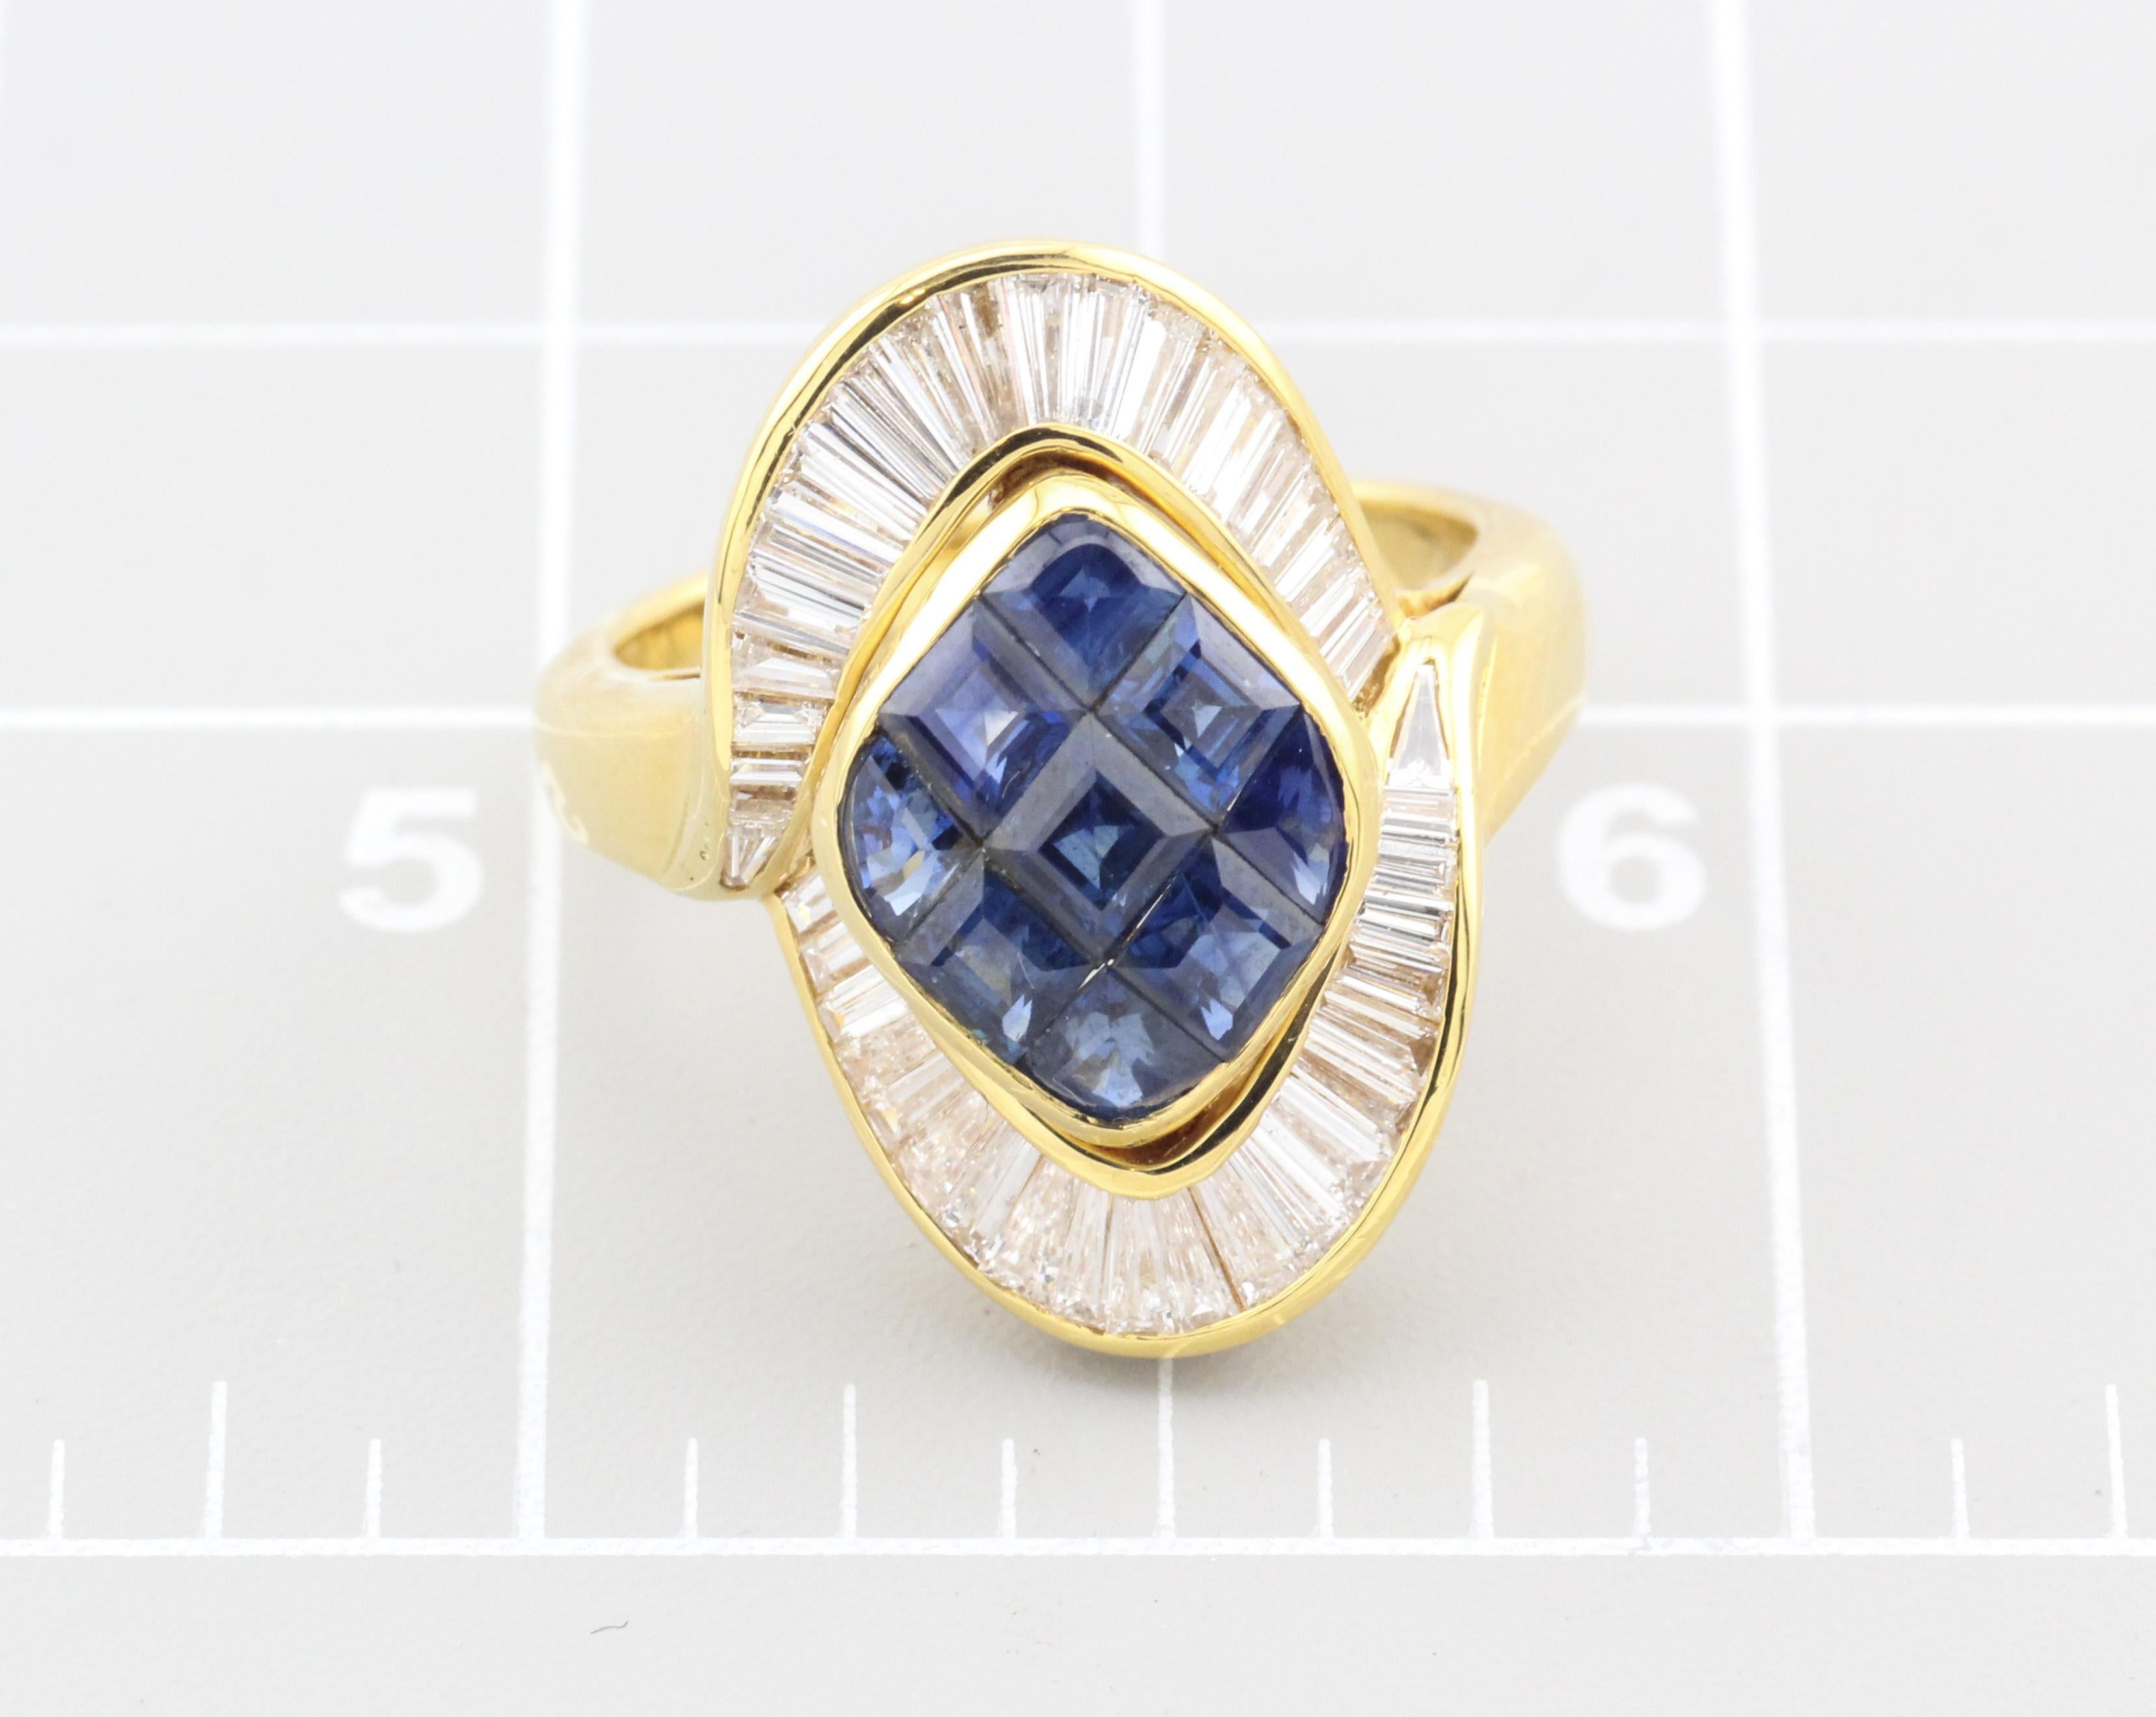 Mouawad Mystery Set Sapphire Diamond 18k Yellow Gold Ring Size 6.75 For Sale 3